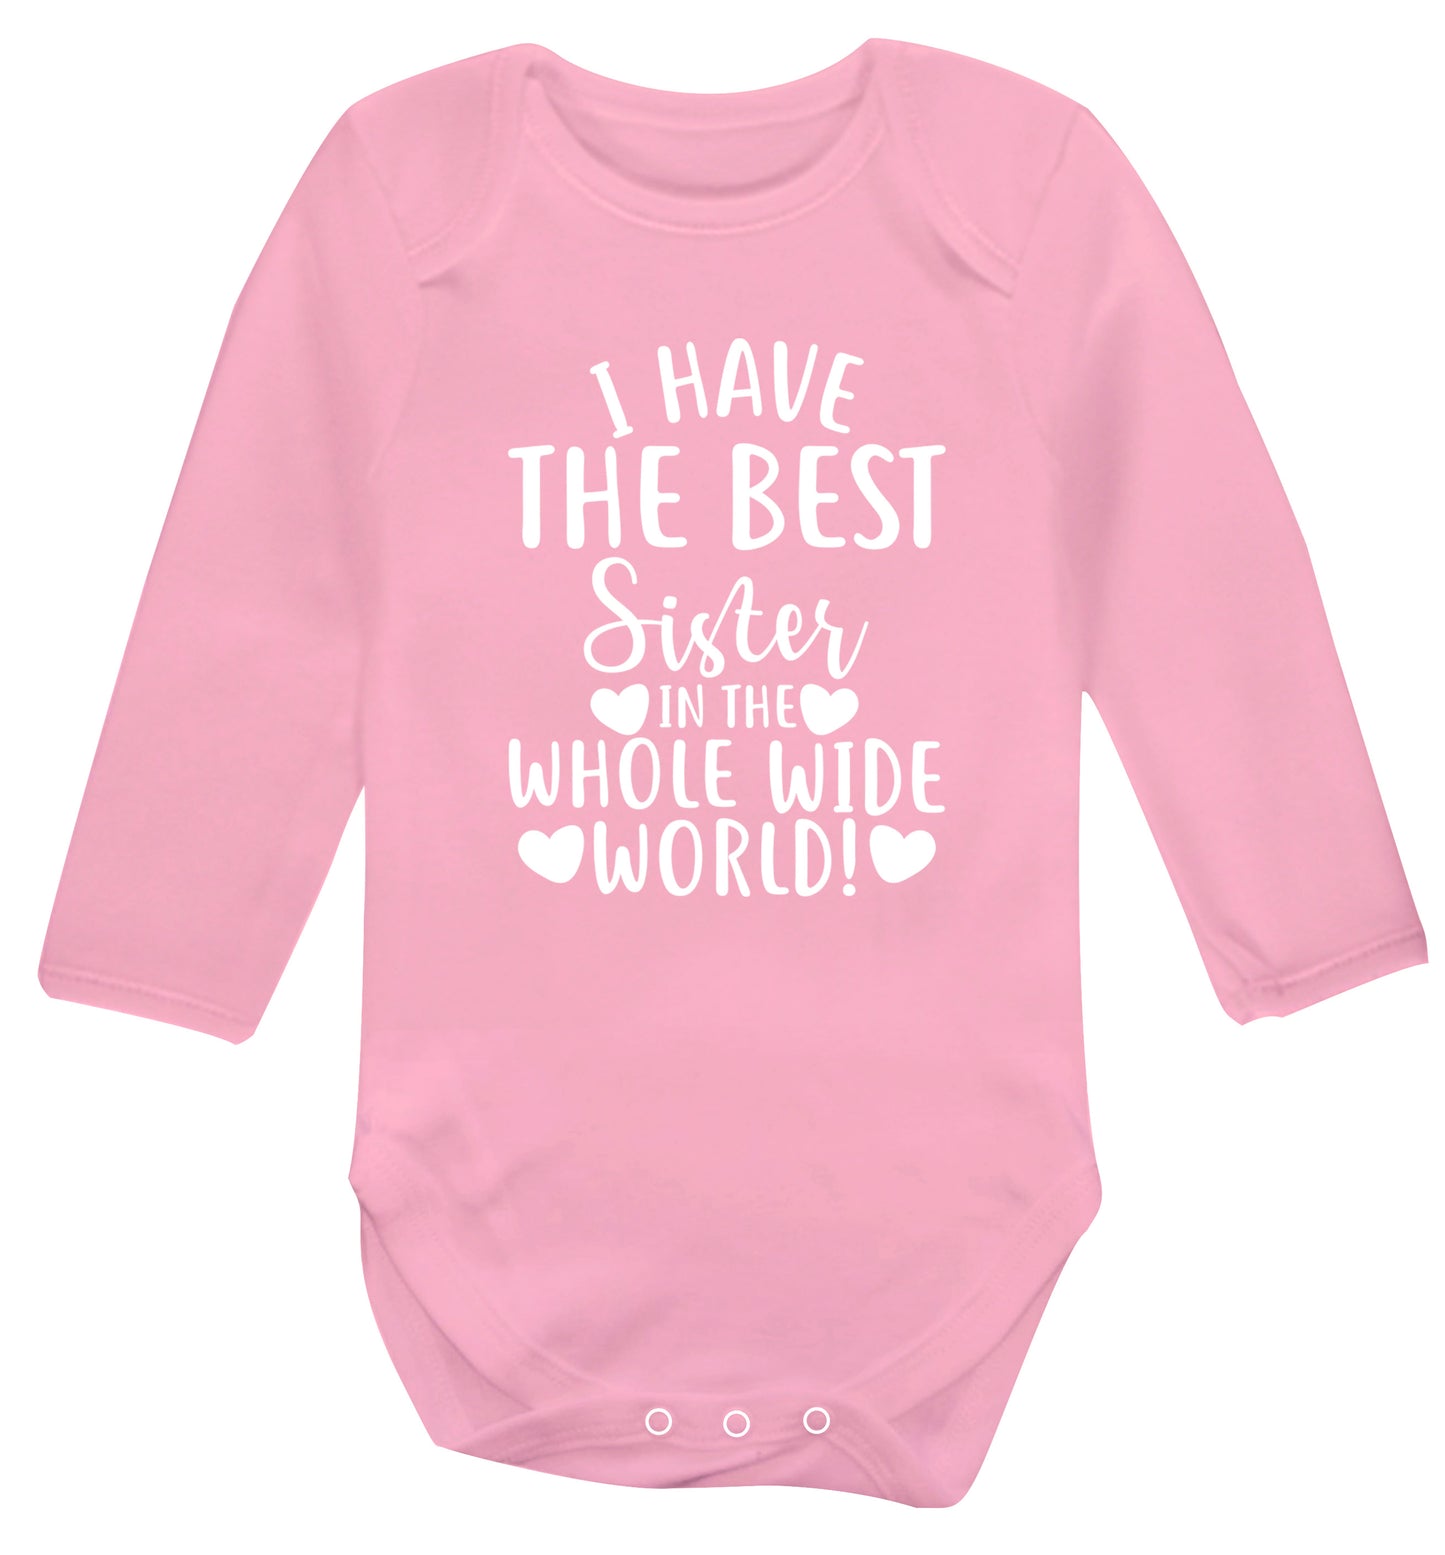 I have the best sister in the whole wide world! Baby Vest long sleeved pale pink 6-12 months